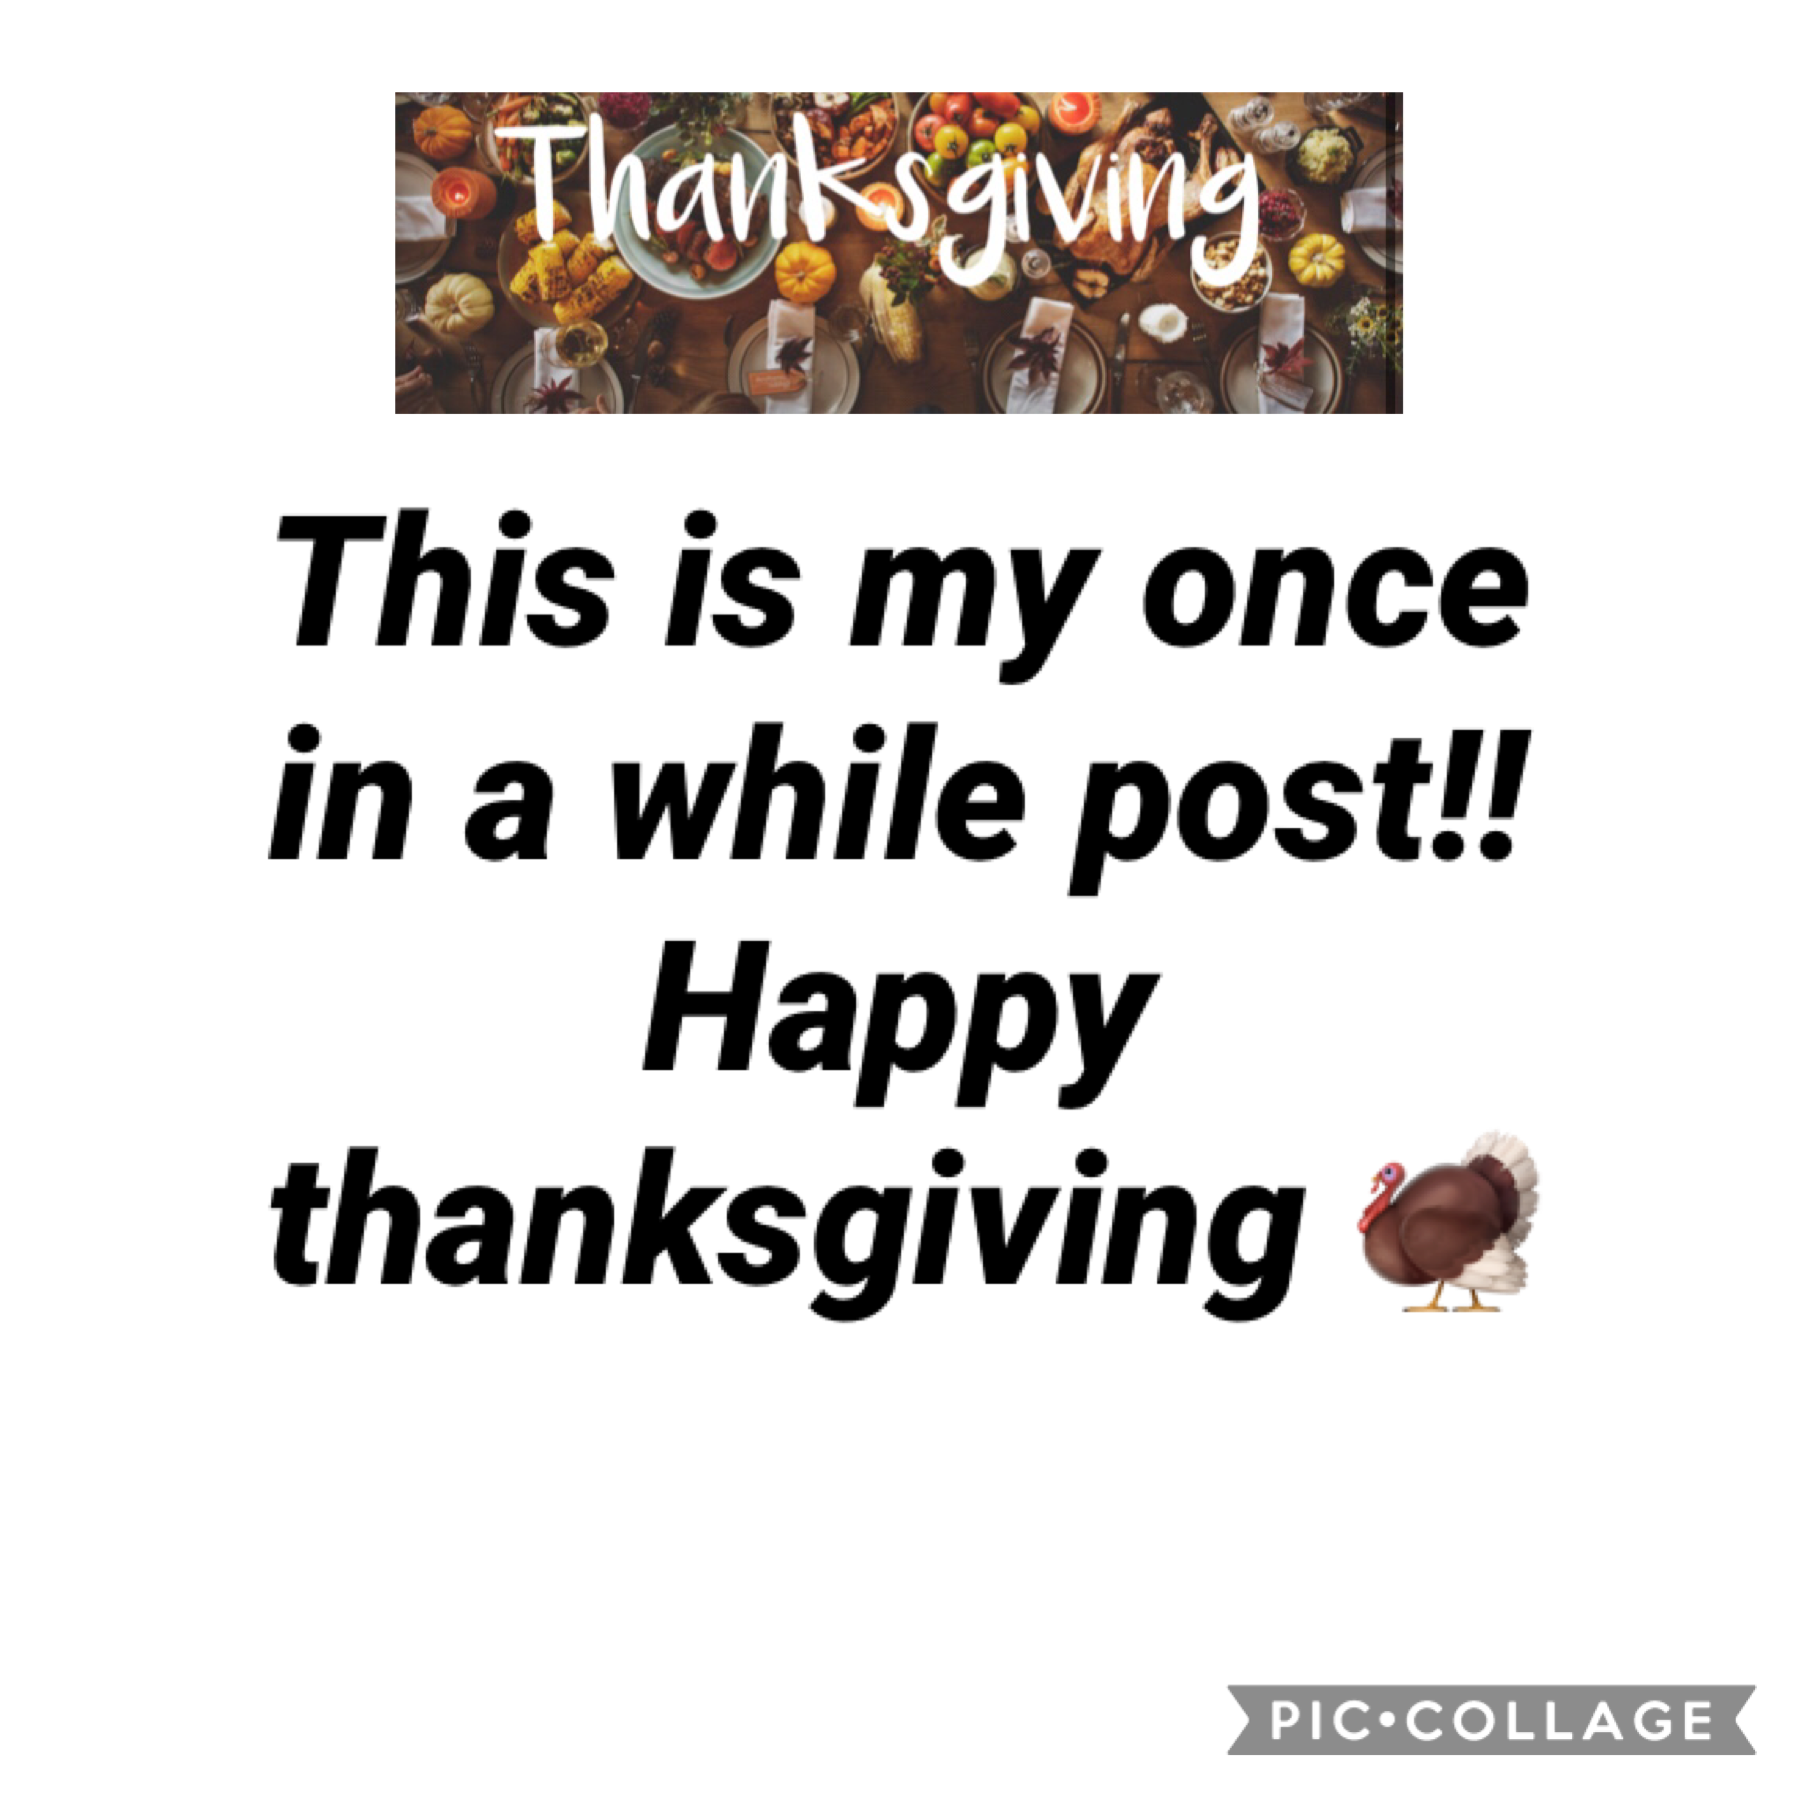 Happy thanksgiving!! This is my once in a while post. Goodbye!